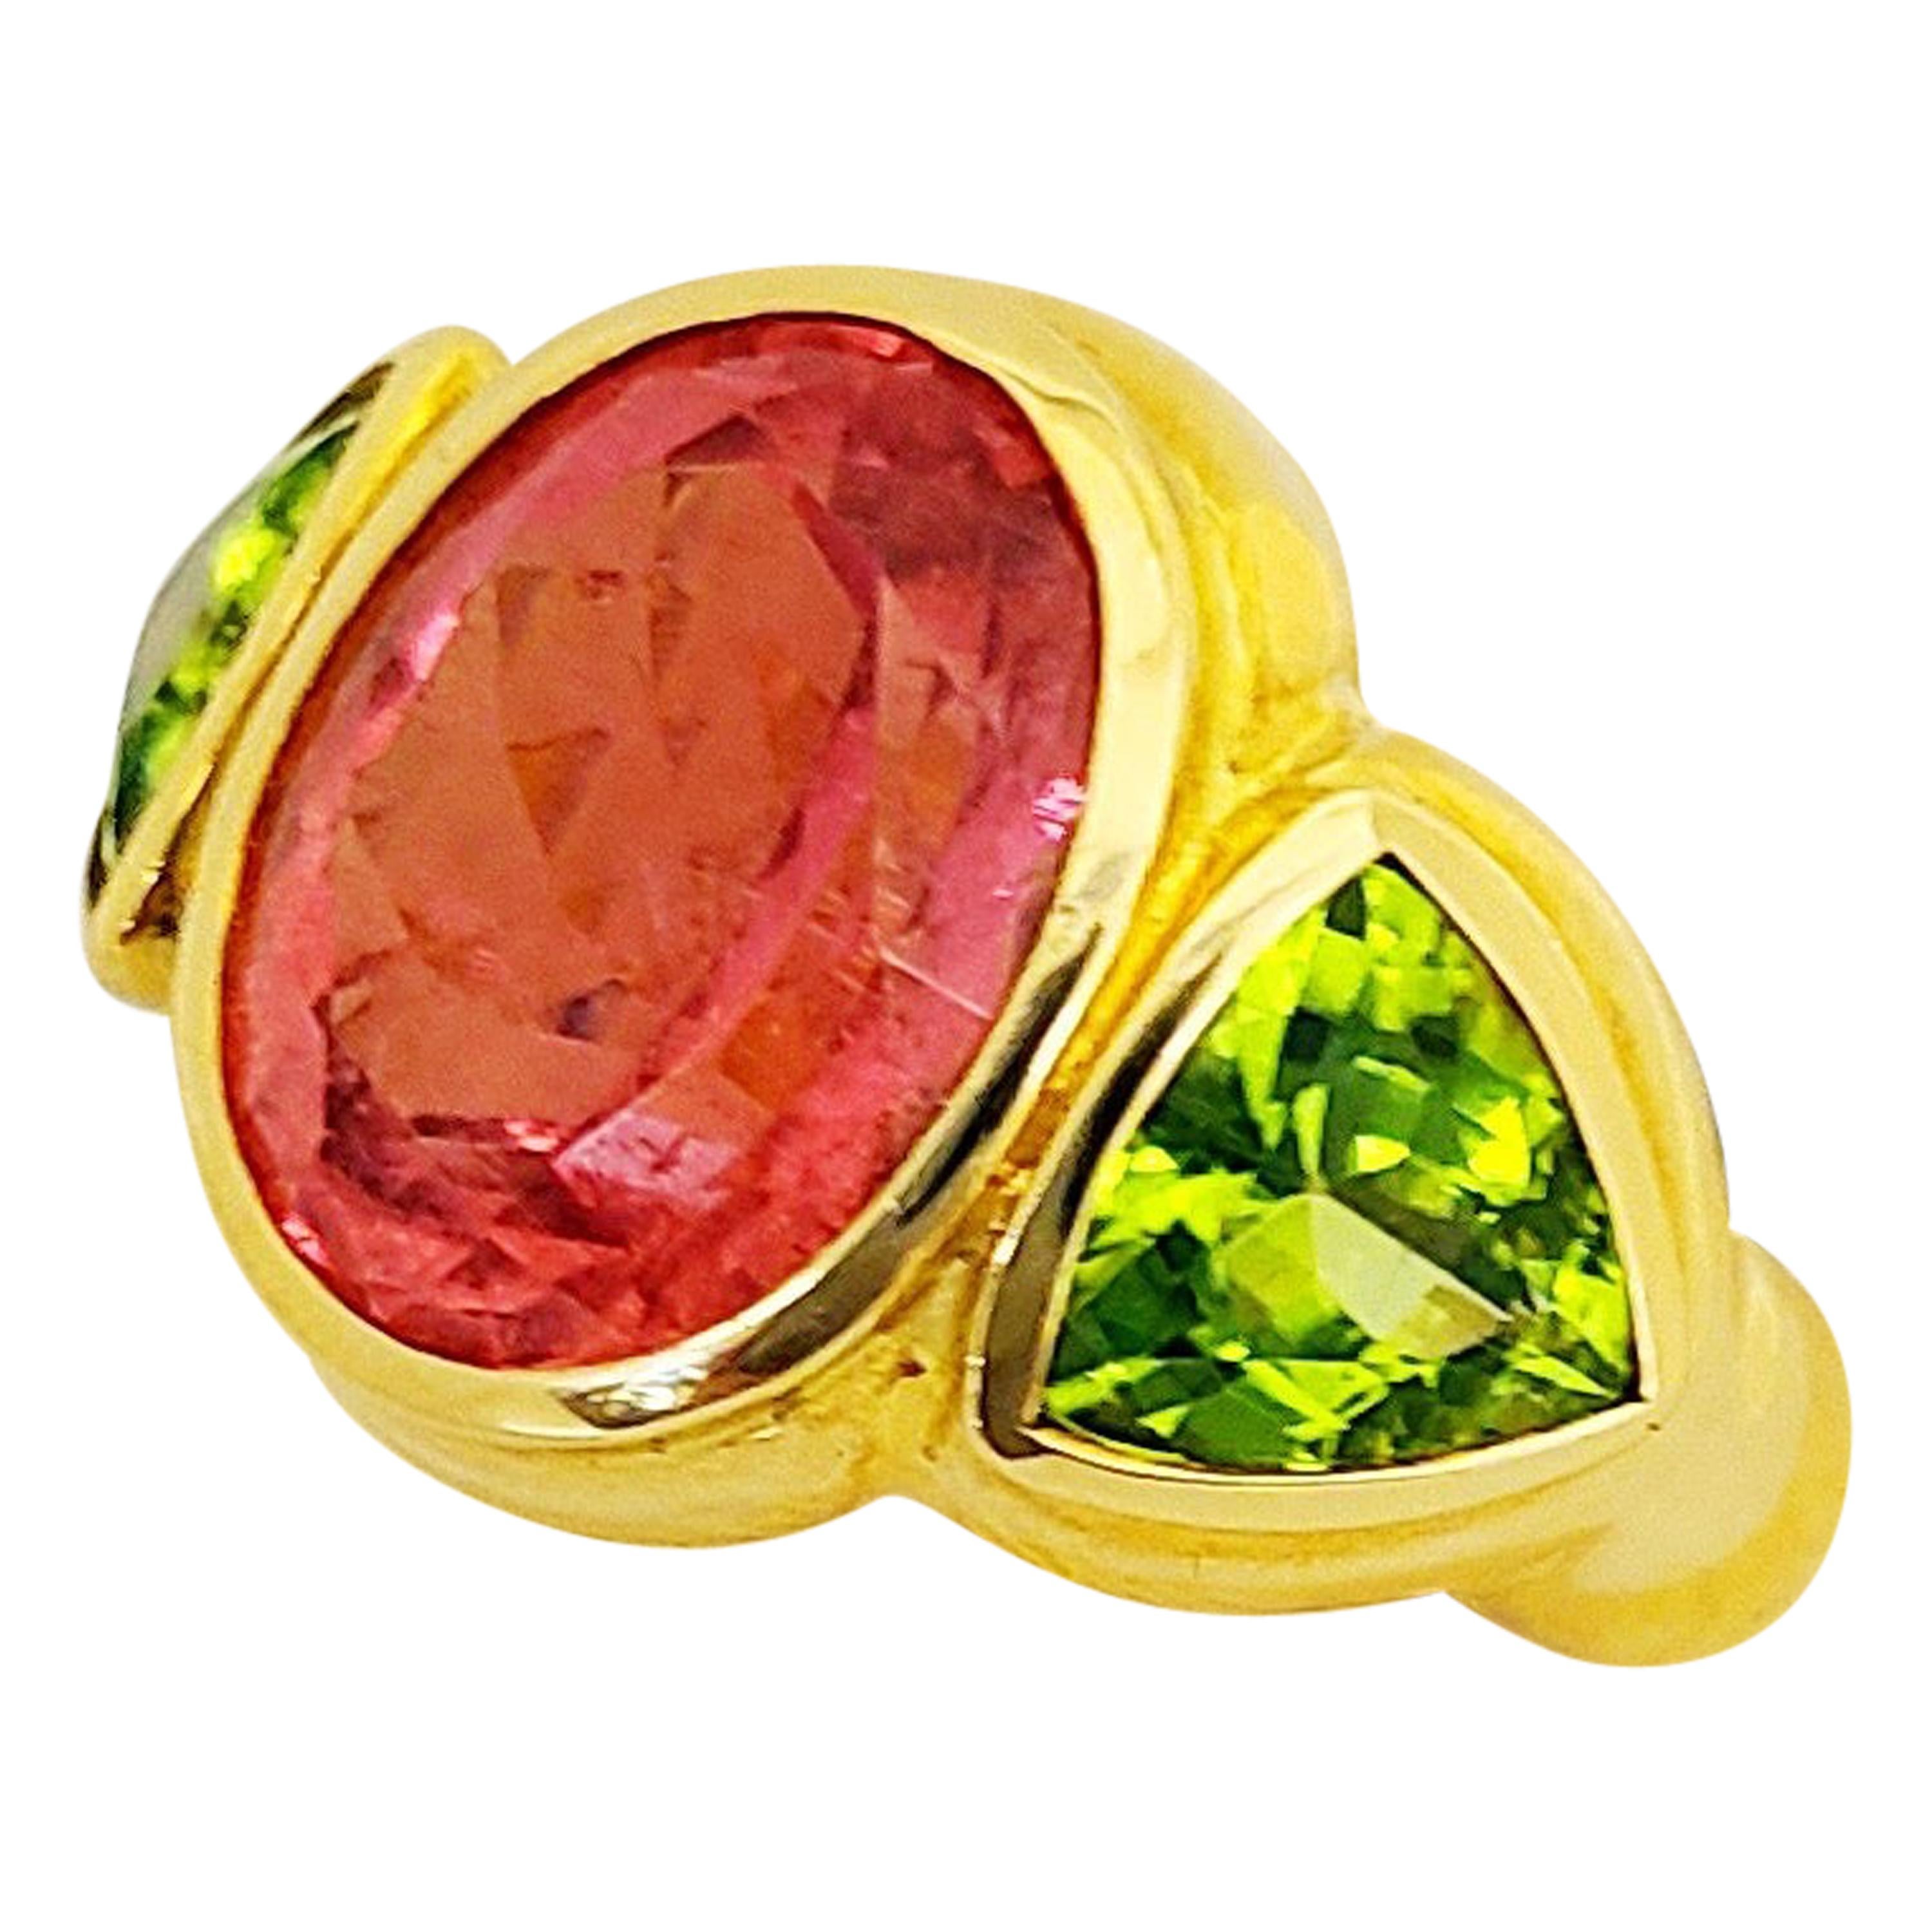 Cellini 18KT Yellow Gold Ring with 8.05 Carat Rubellite and 3.46 Carat Peridot